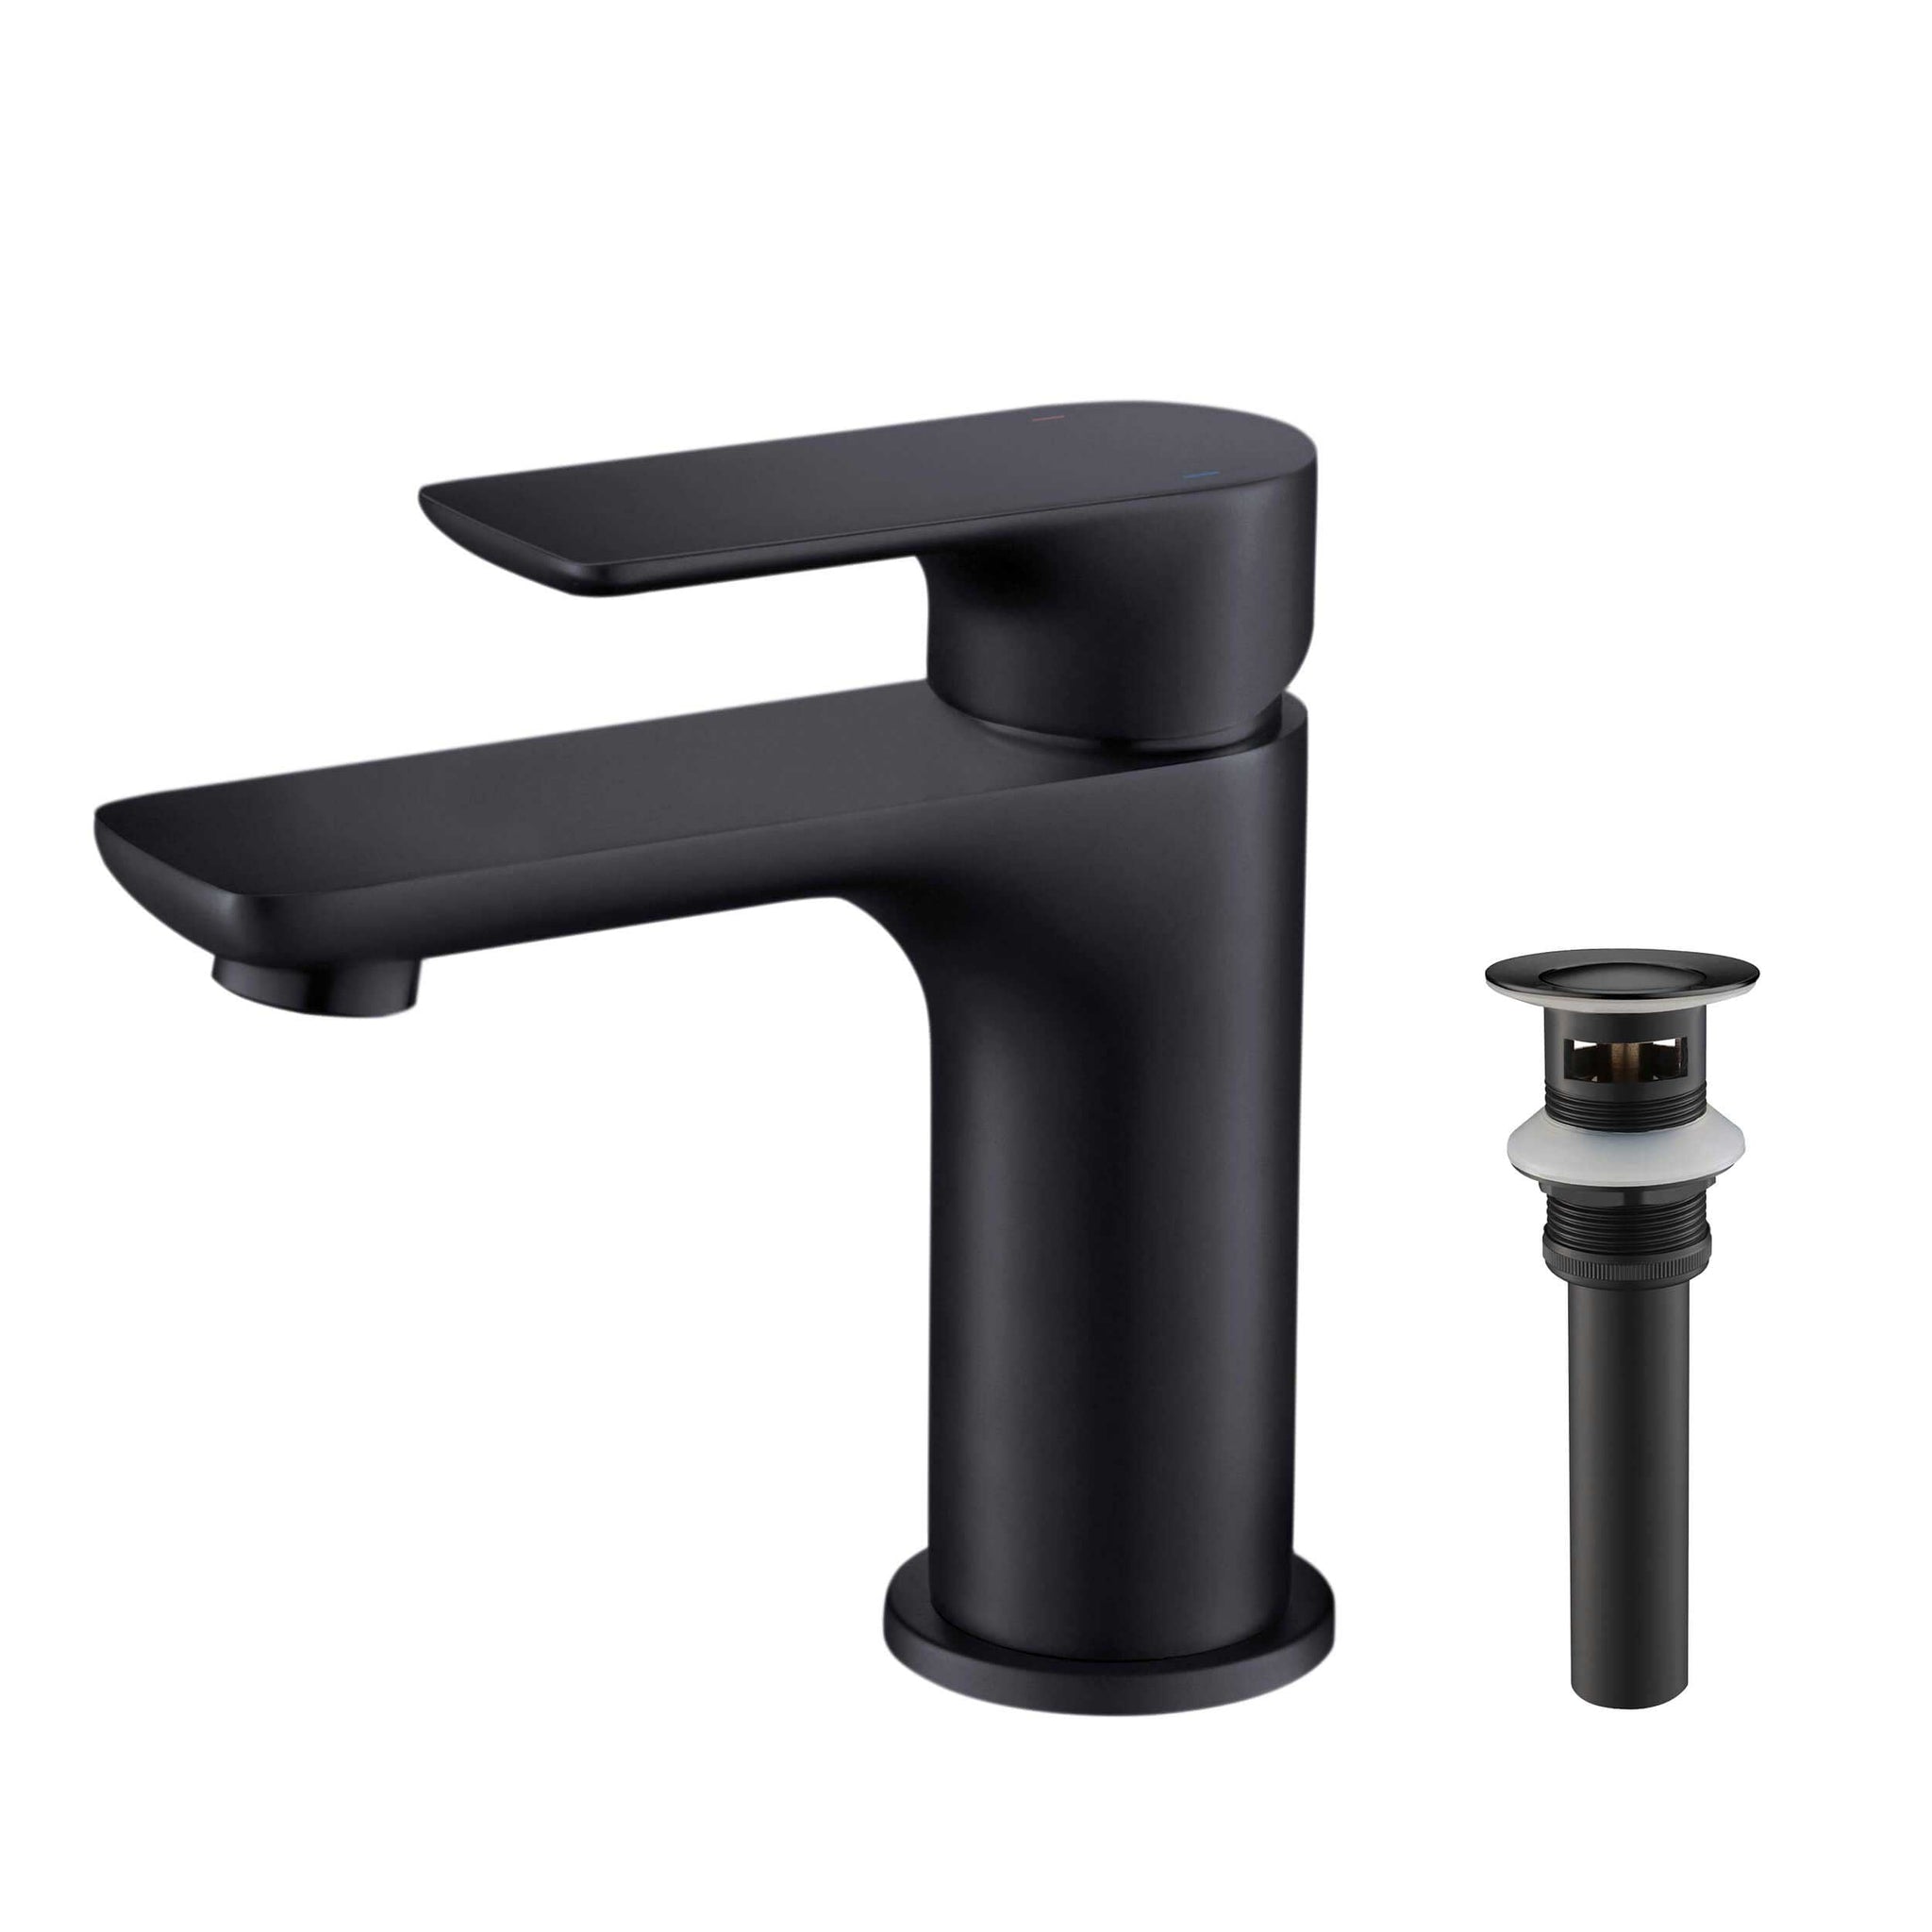 KIBI, KIBI Tender Single Handle Matte Black Solid Brass Bathroom Sink Faucet With Pop-Up Drain Stopper Small Cover With Overflow